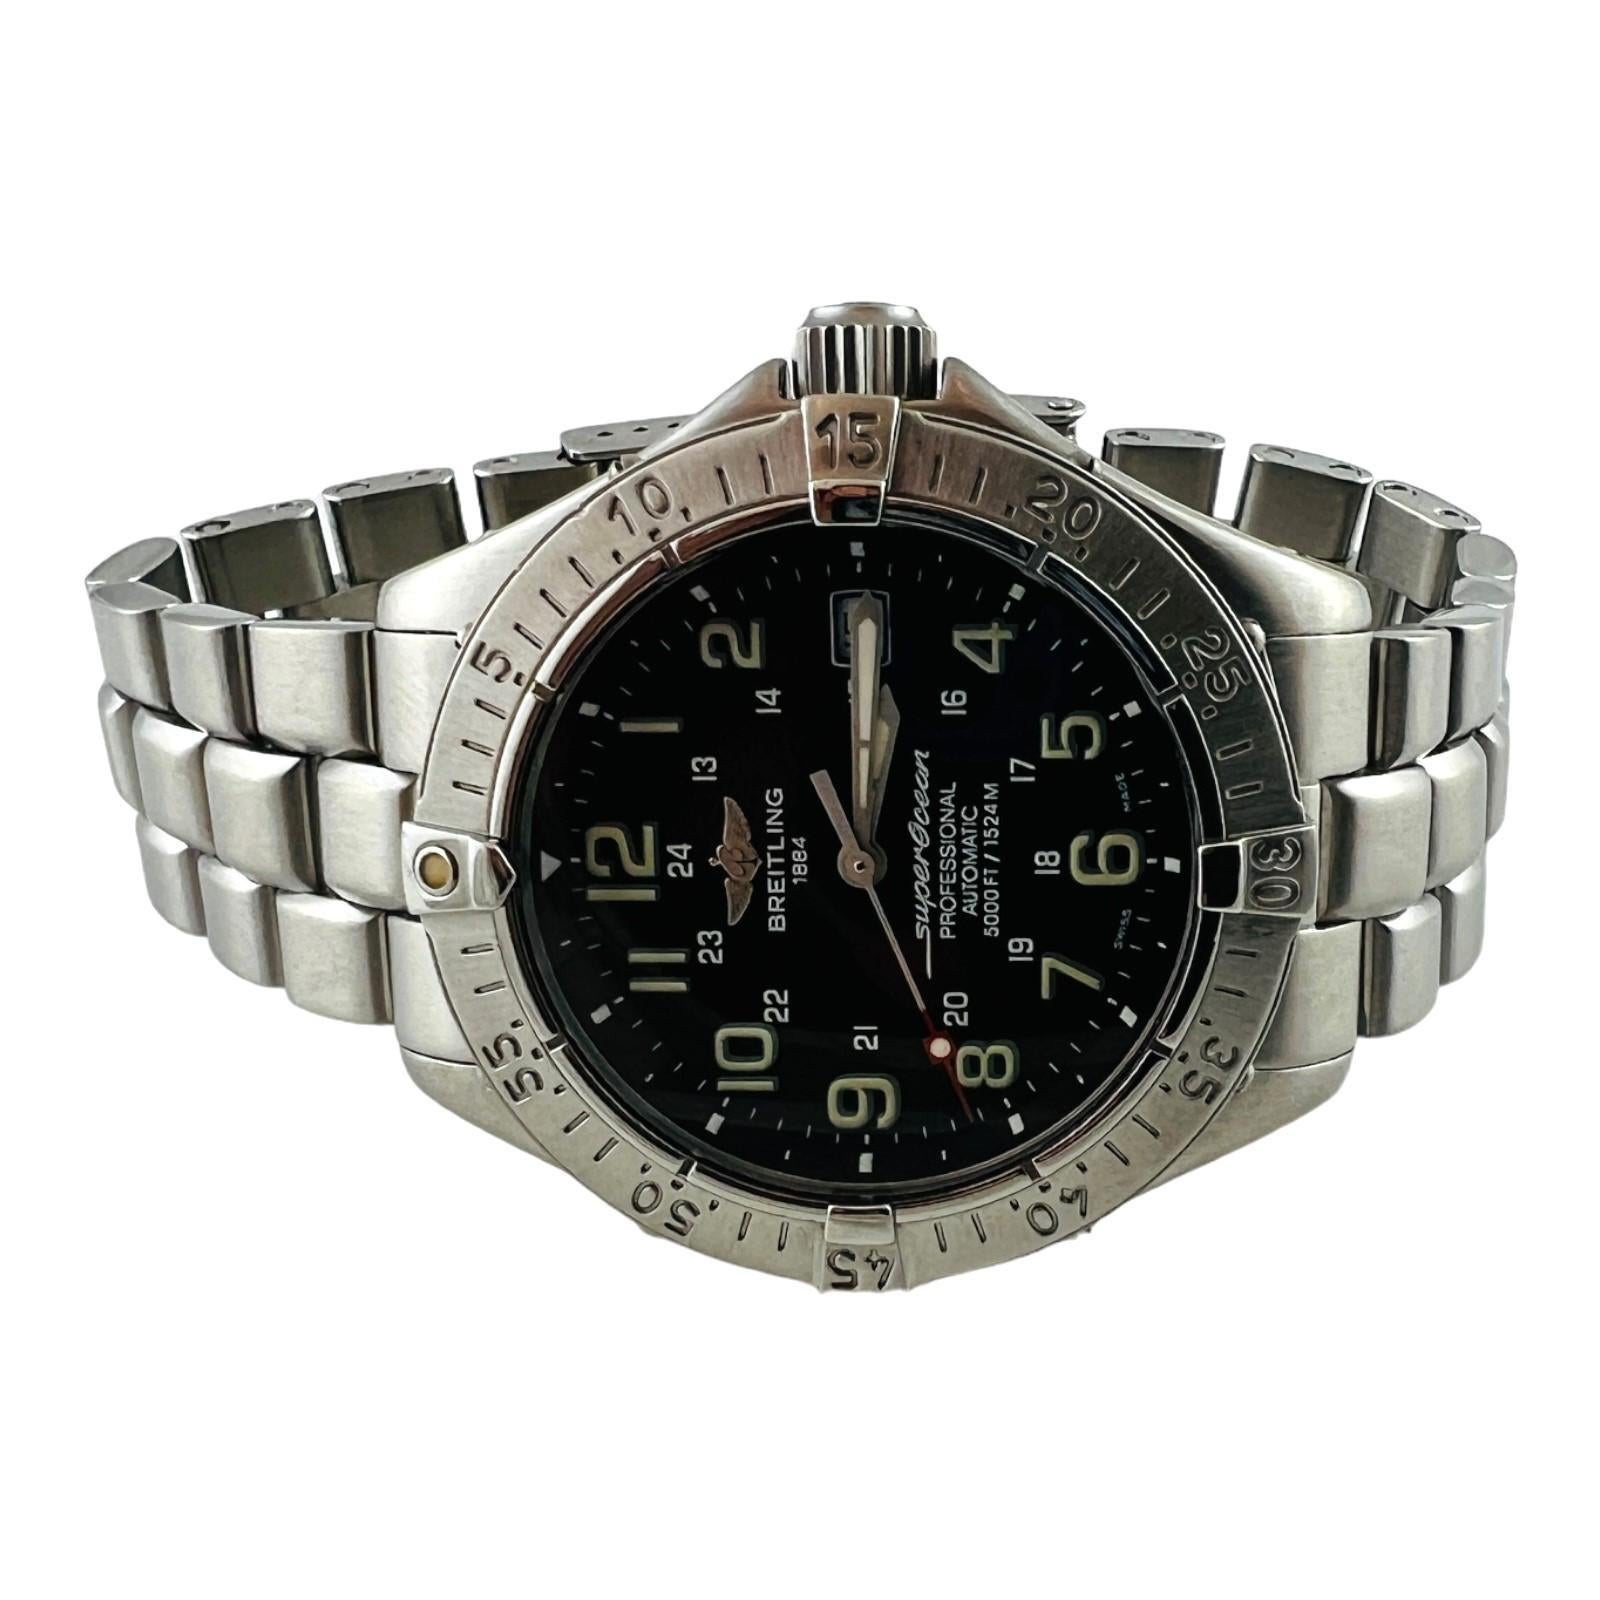 Breitling Super Ocean Men's Watch

Model: A17345
Serial : 168461

This Breitling watch is set in stainless steel

Case is 42mm

Automatic movement

Black Arabic dial

stainless steel band in very good condition with a slight stretch - fits up to